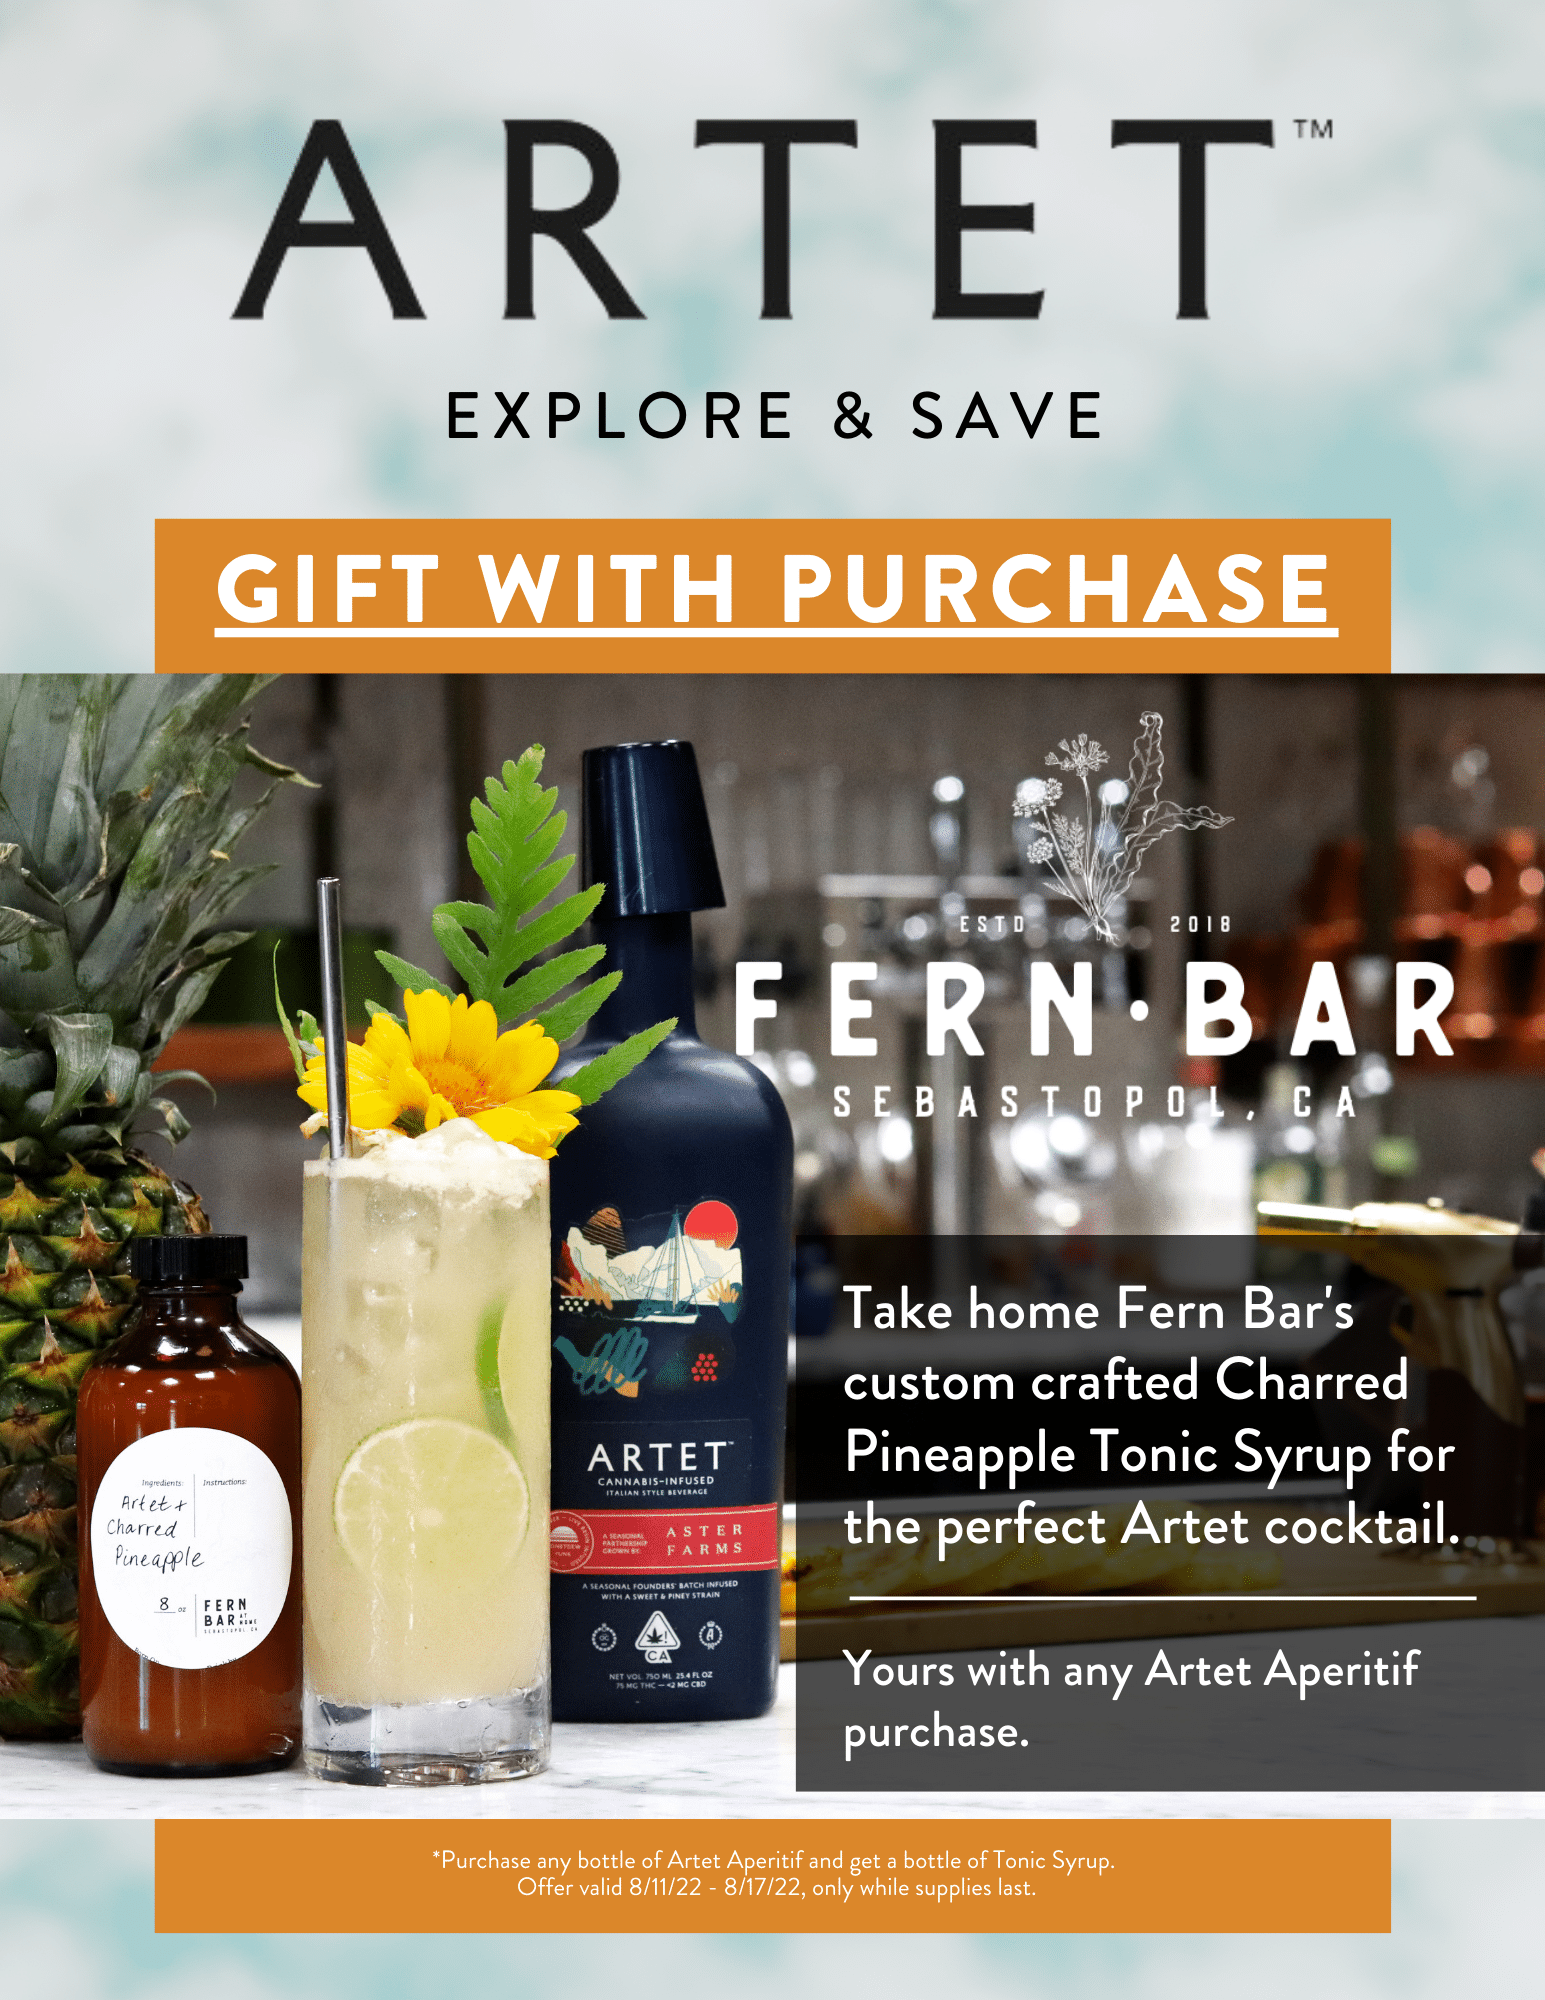 Gift with Purchase - Fern Bar Tonic